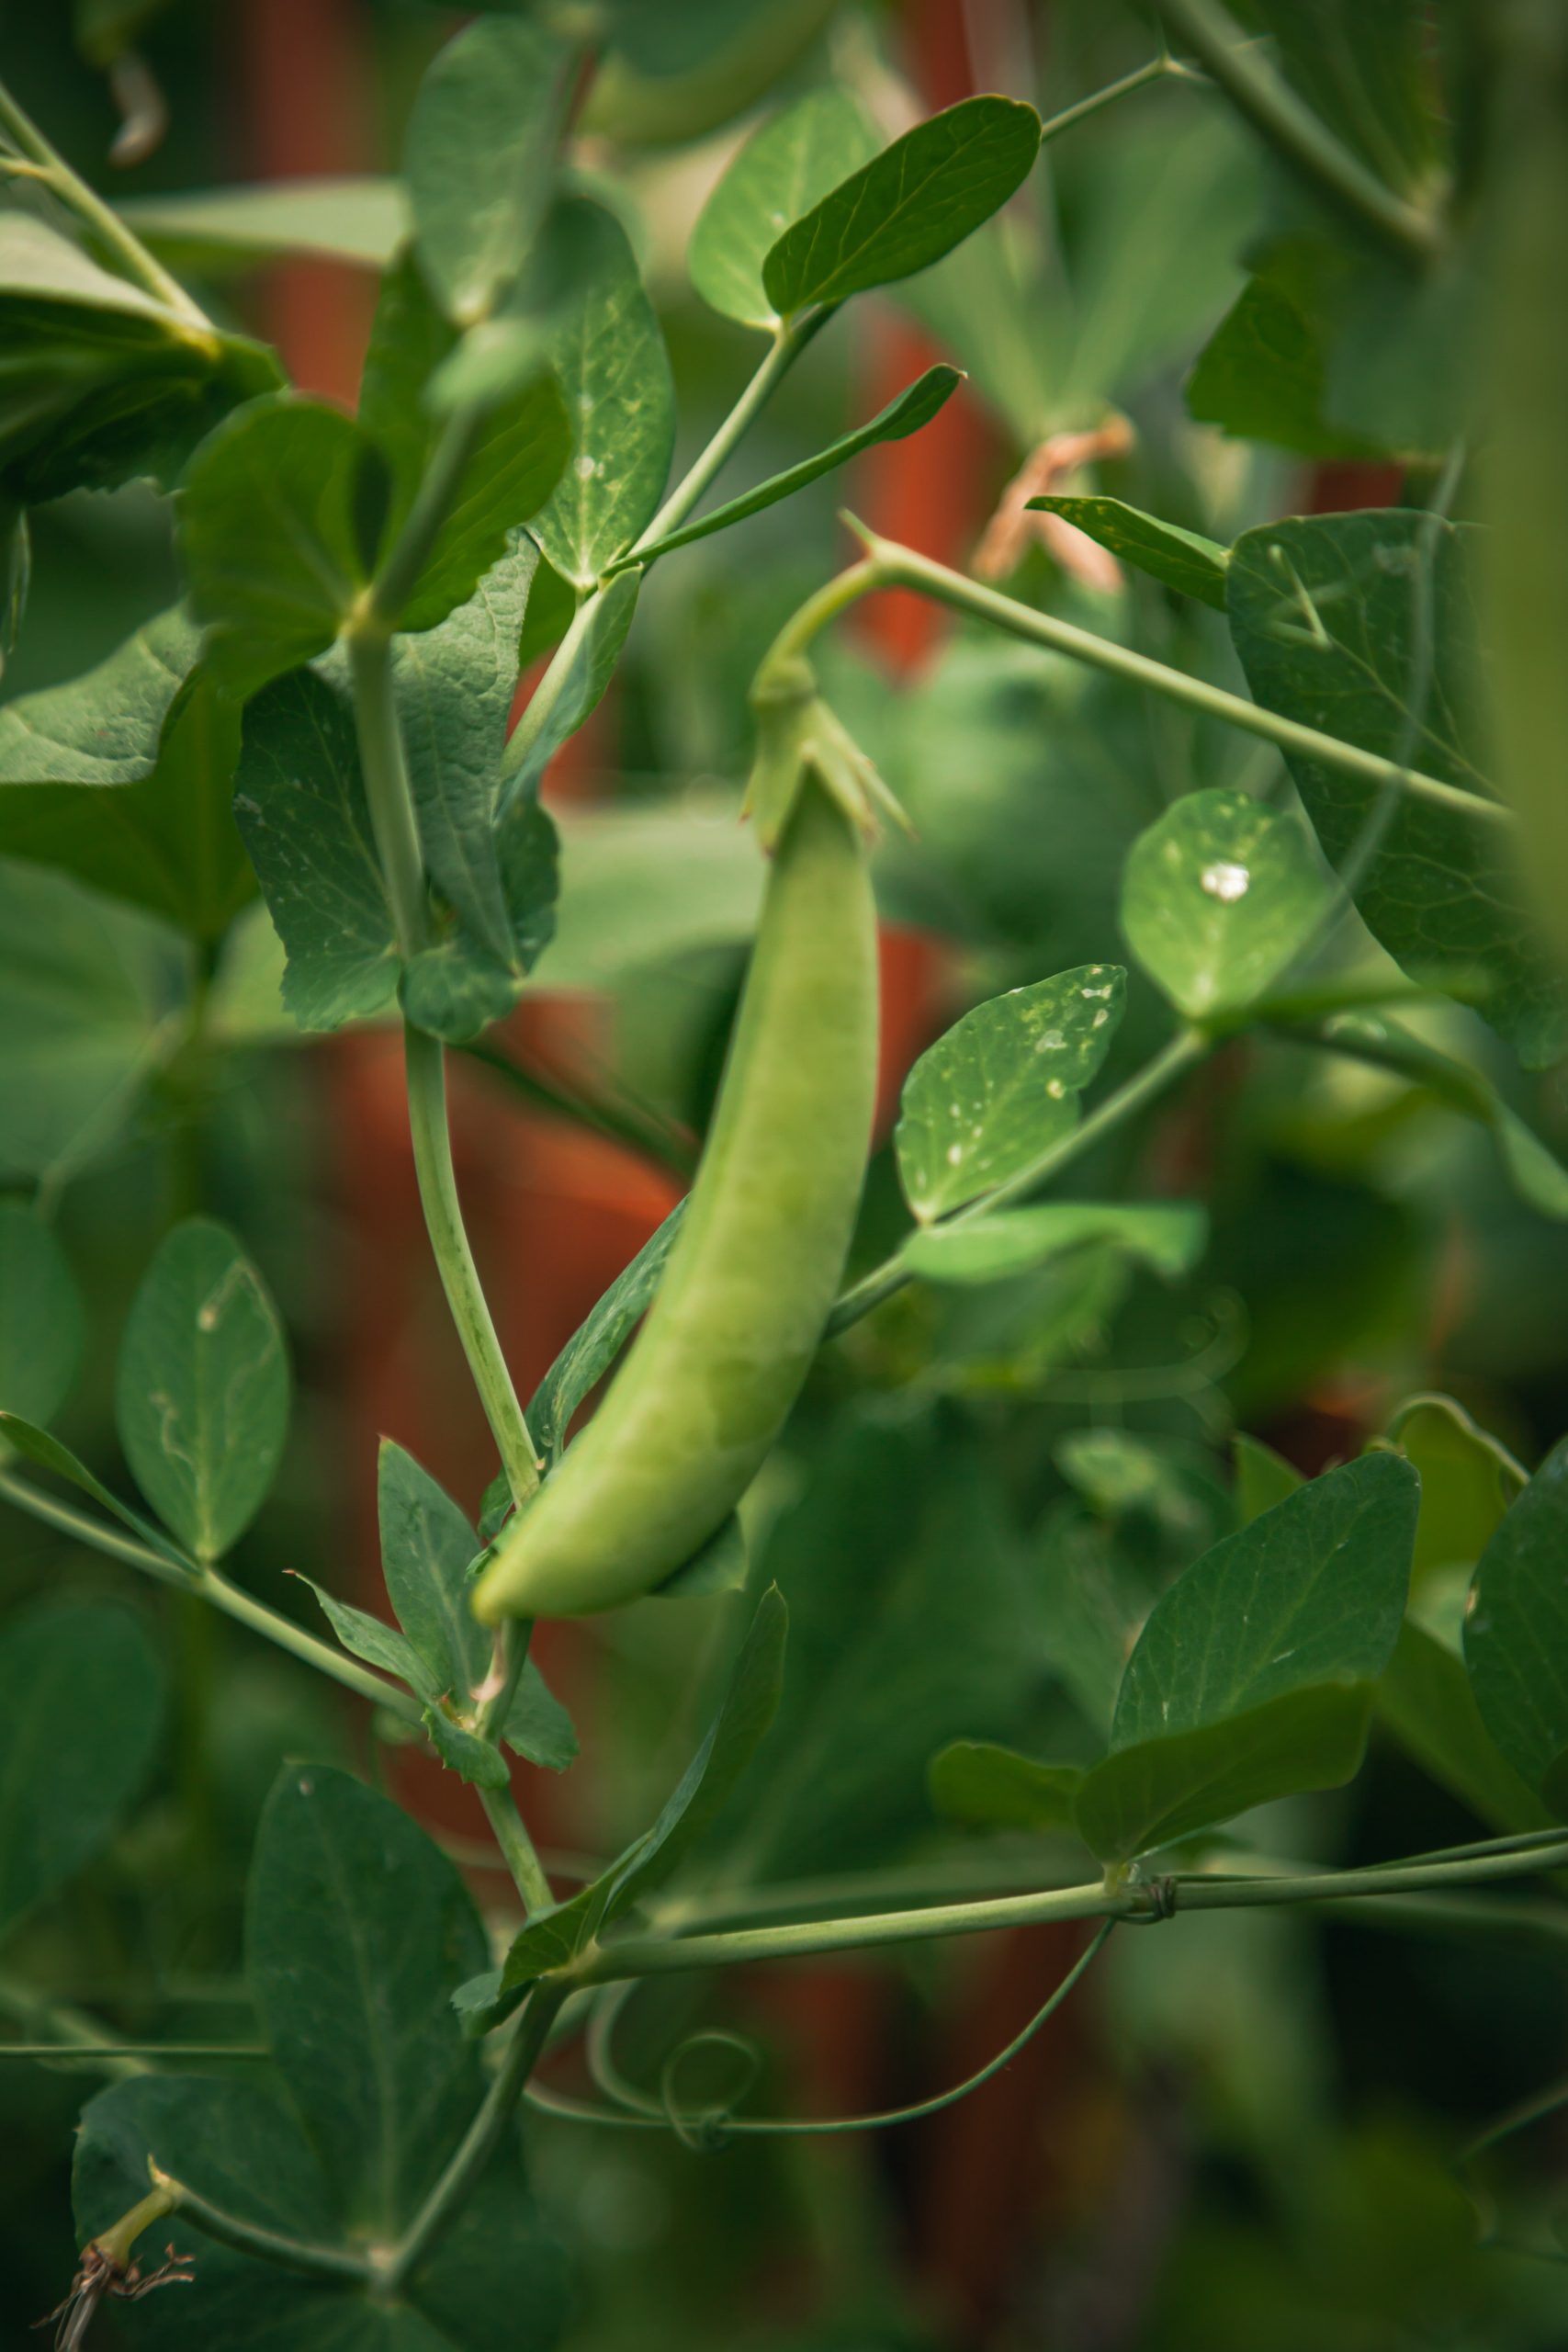 is-it-too-late-to-plant-peas-what-is-the-best-time-to-plant-them